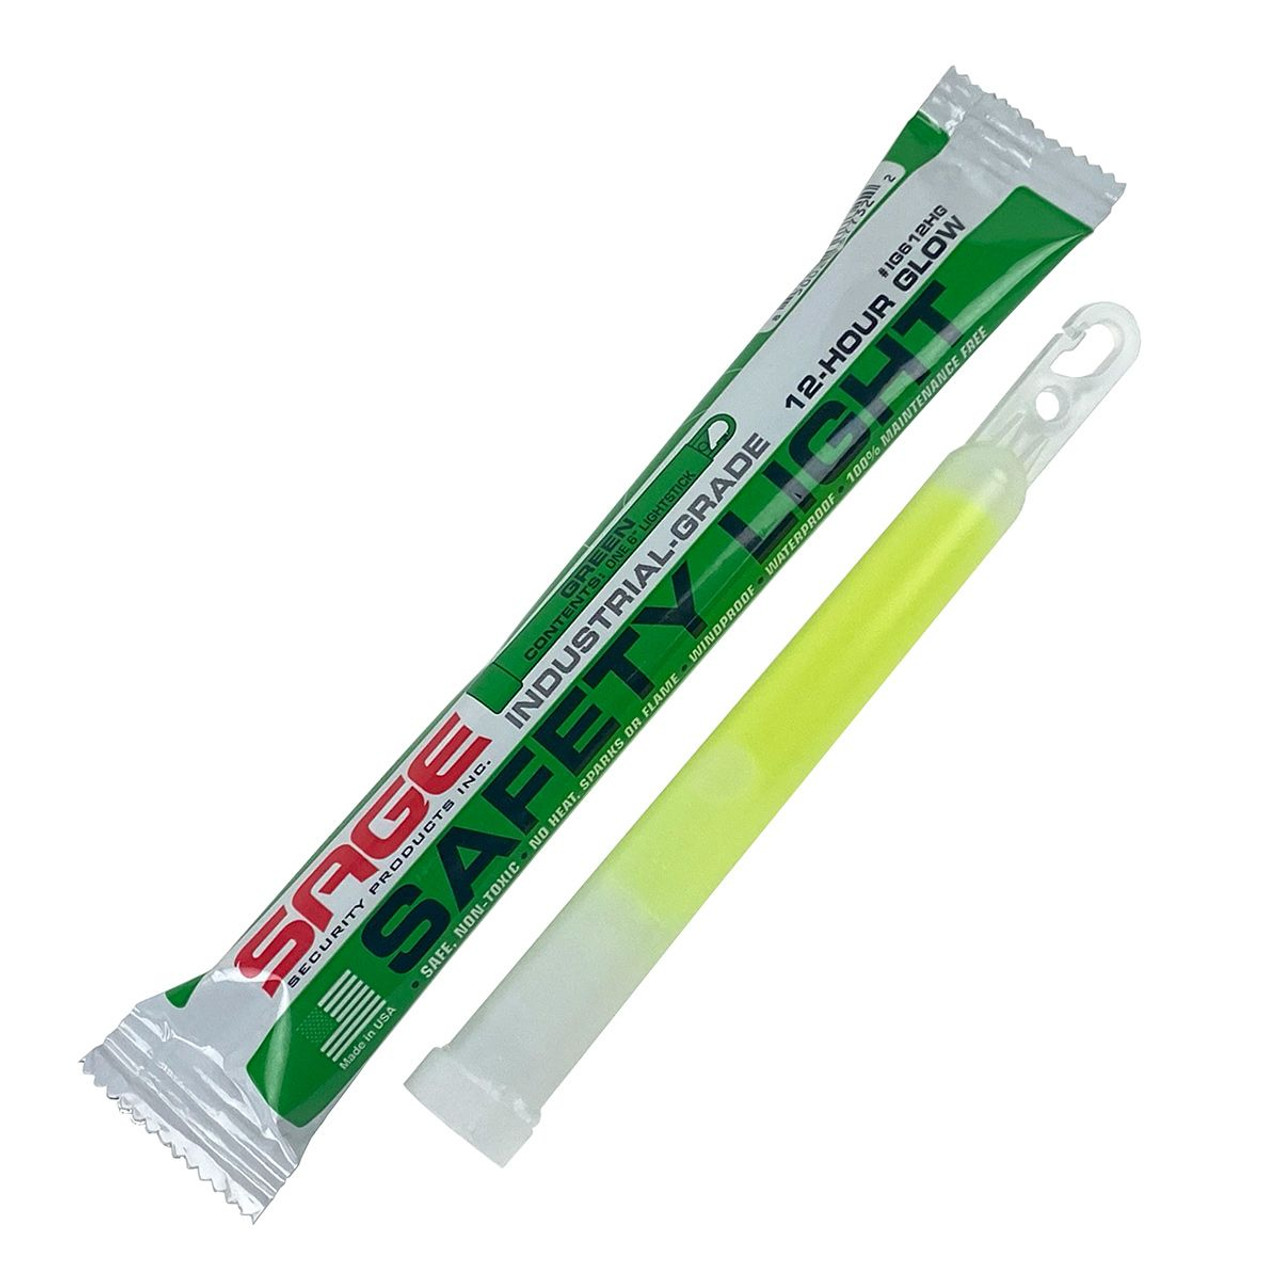 Ready America 12-Hour Green Safety Light Stick 27017 - The Home Depot